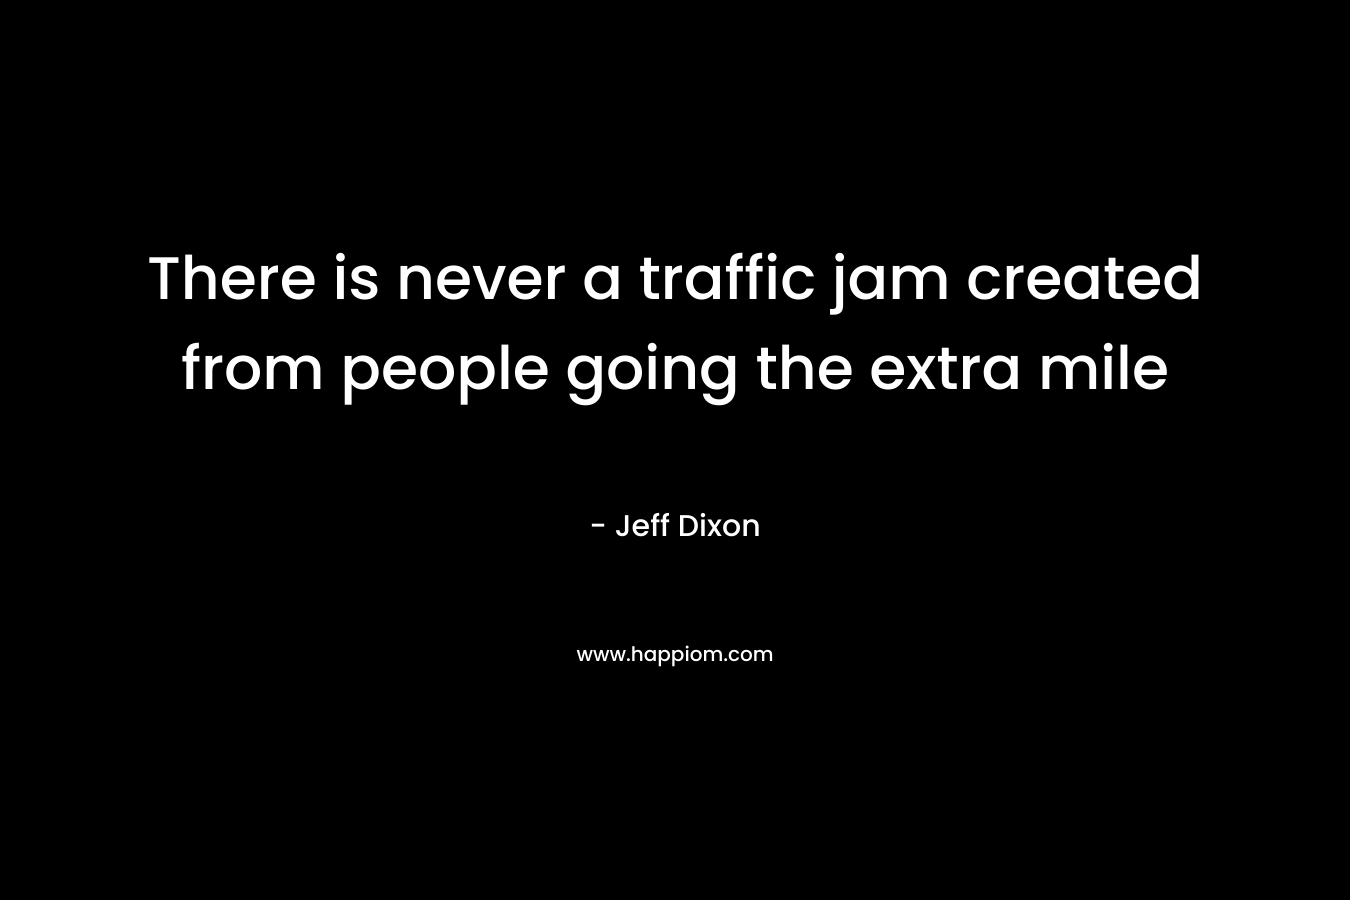 There is never a traffic jam created from people going the extra mile